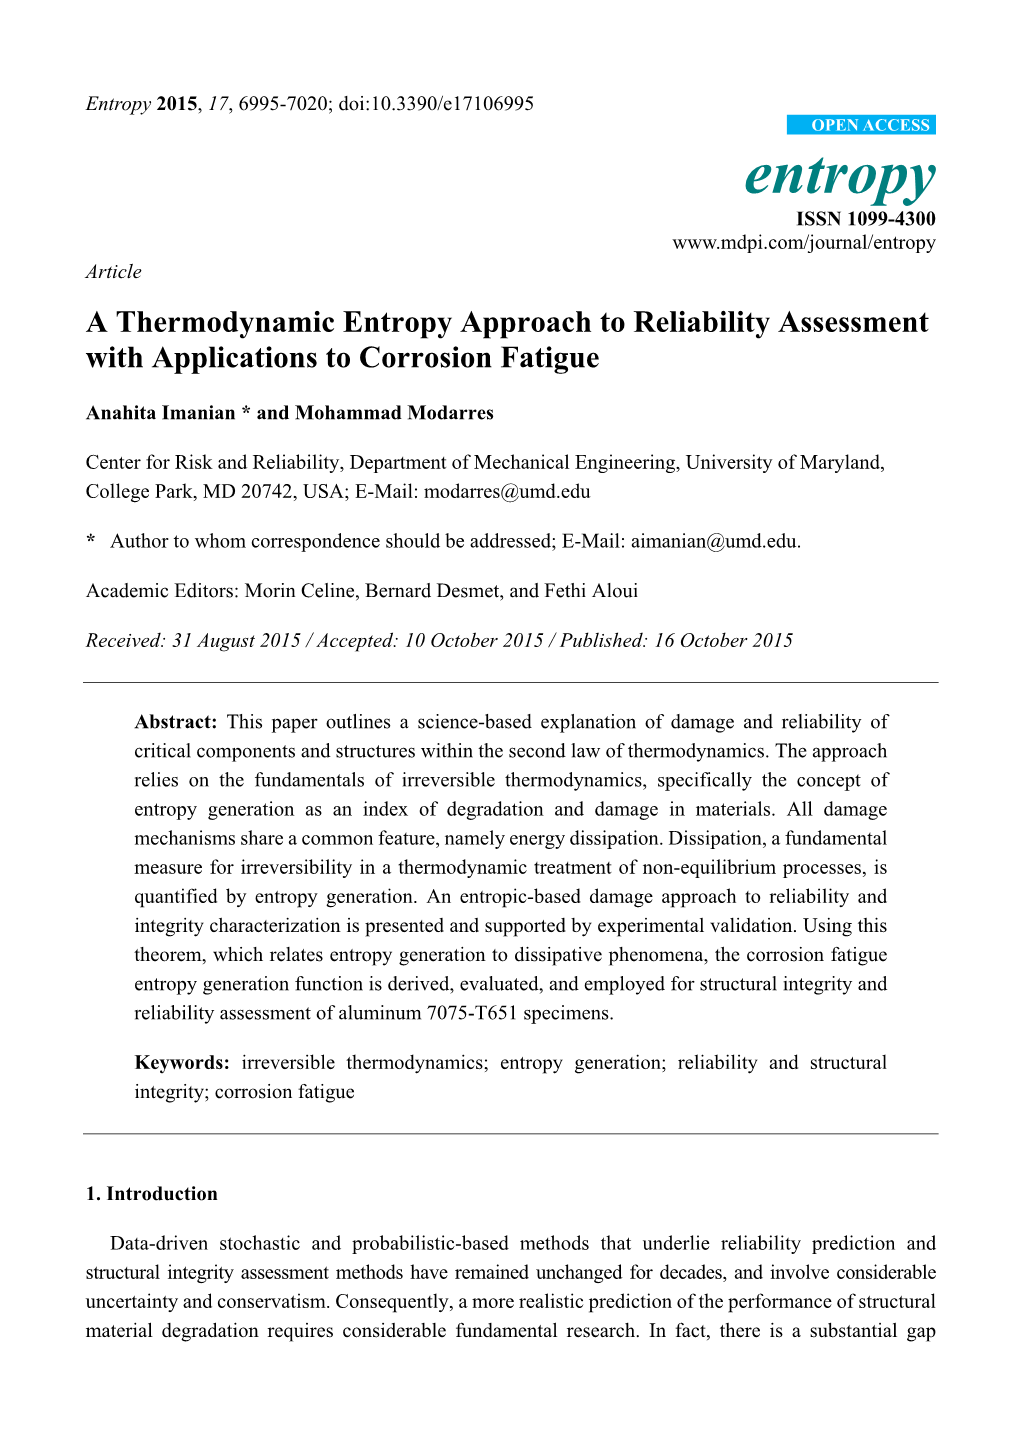 A Thermodynamic Entropy Approach to Reliability Assessment with Applications to Corrosion Fatigue